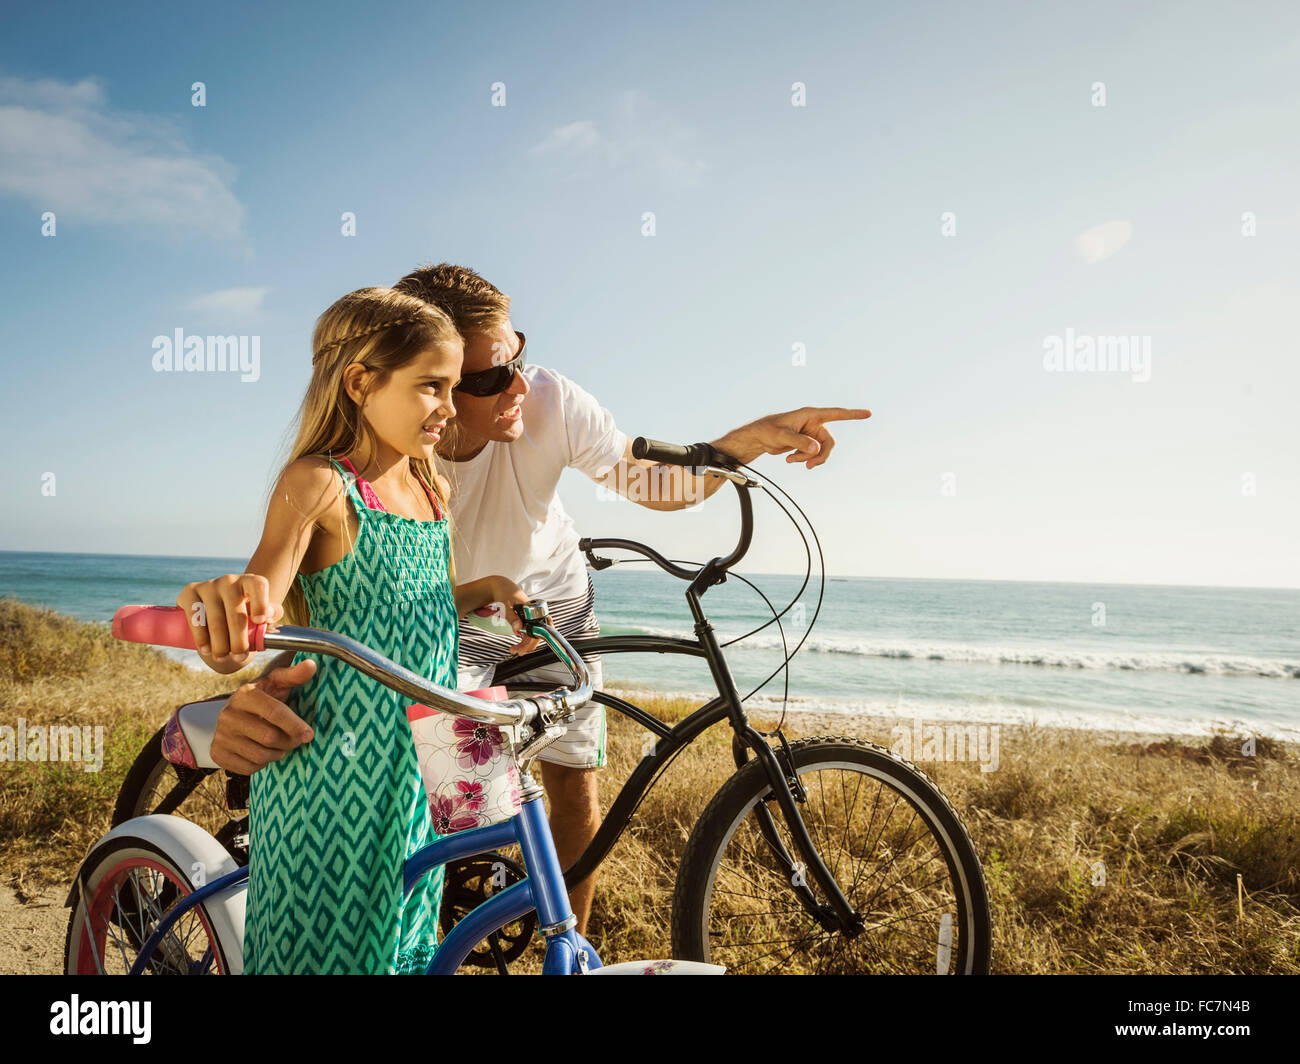 Caucasian father and daughter riding bicycles on beach Stock Photo